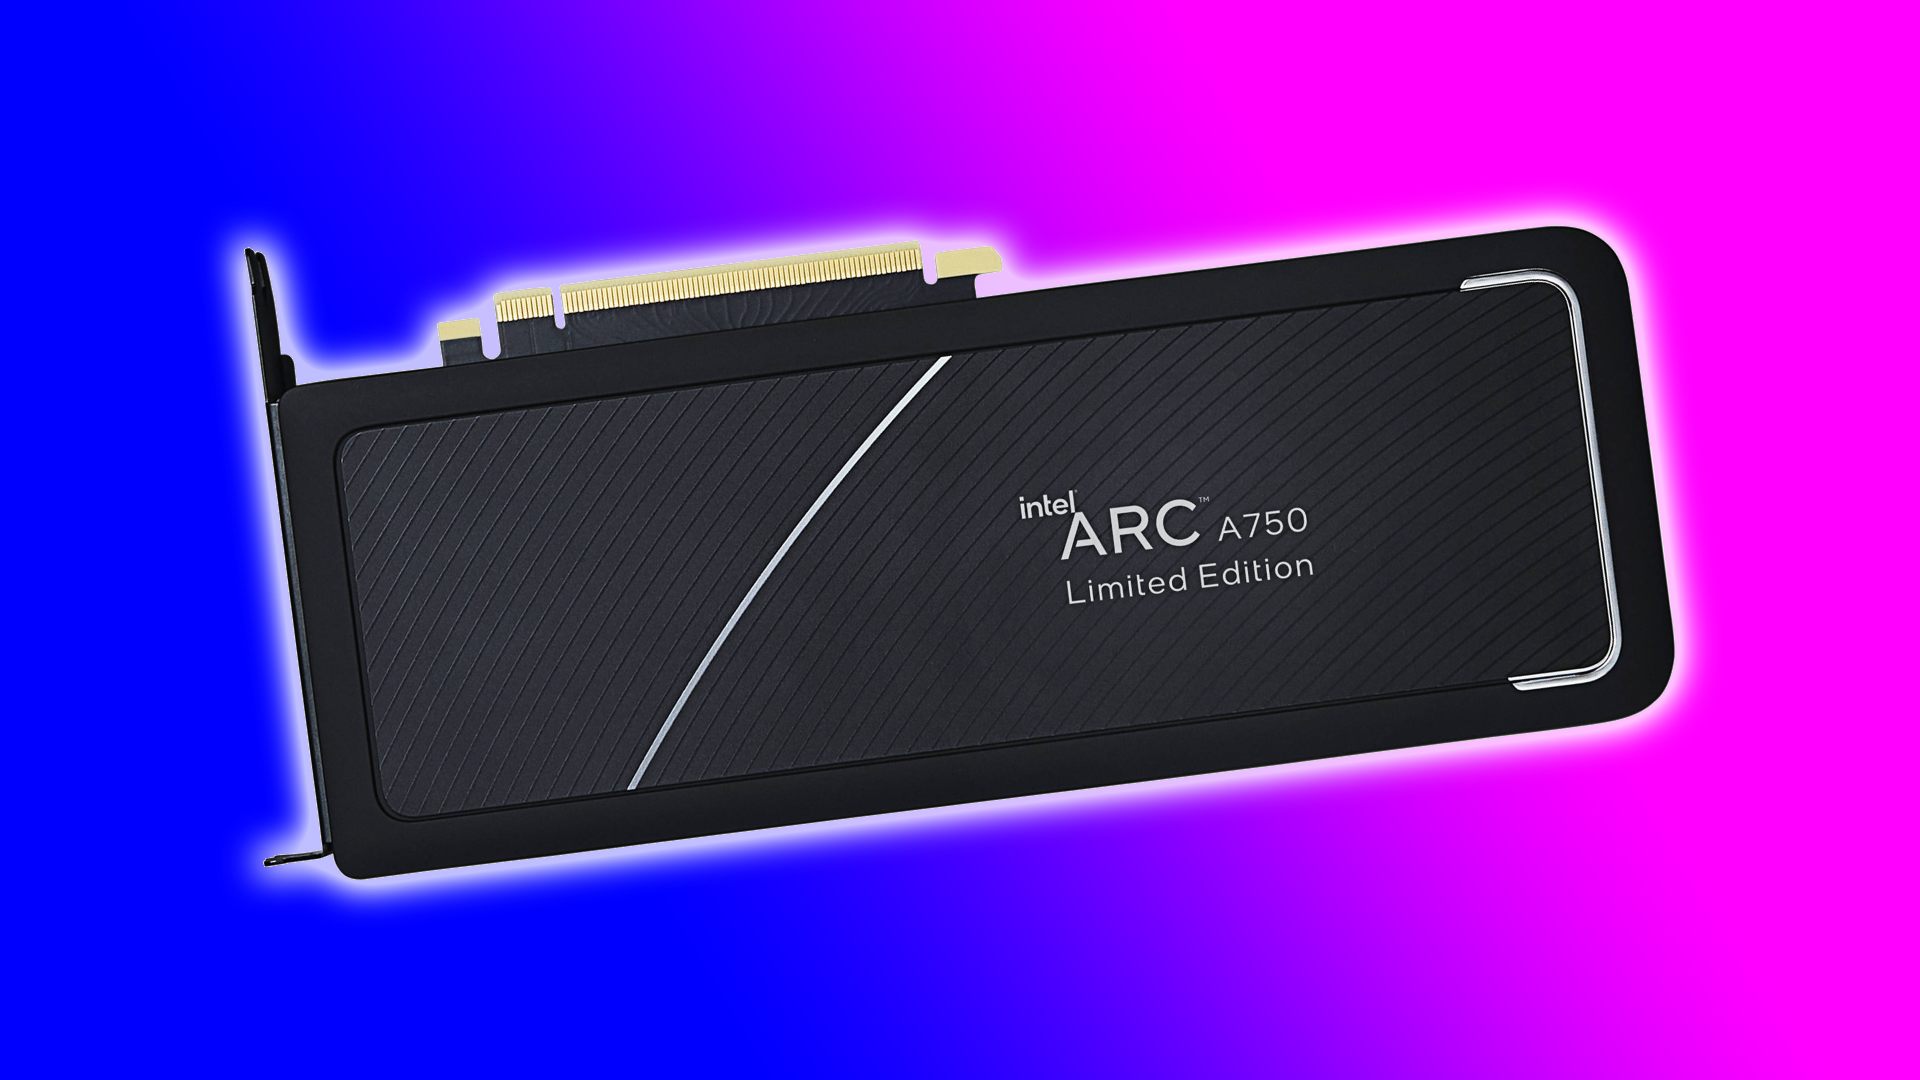 Intel's Arc A750 graphics card just got cheaper and better